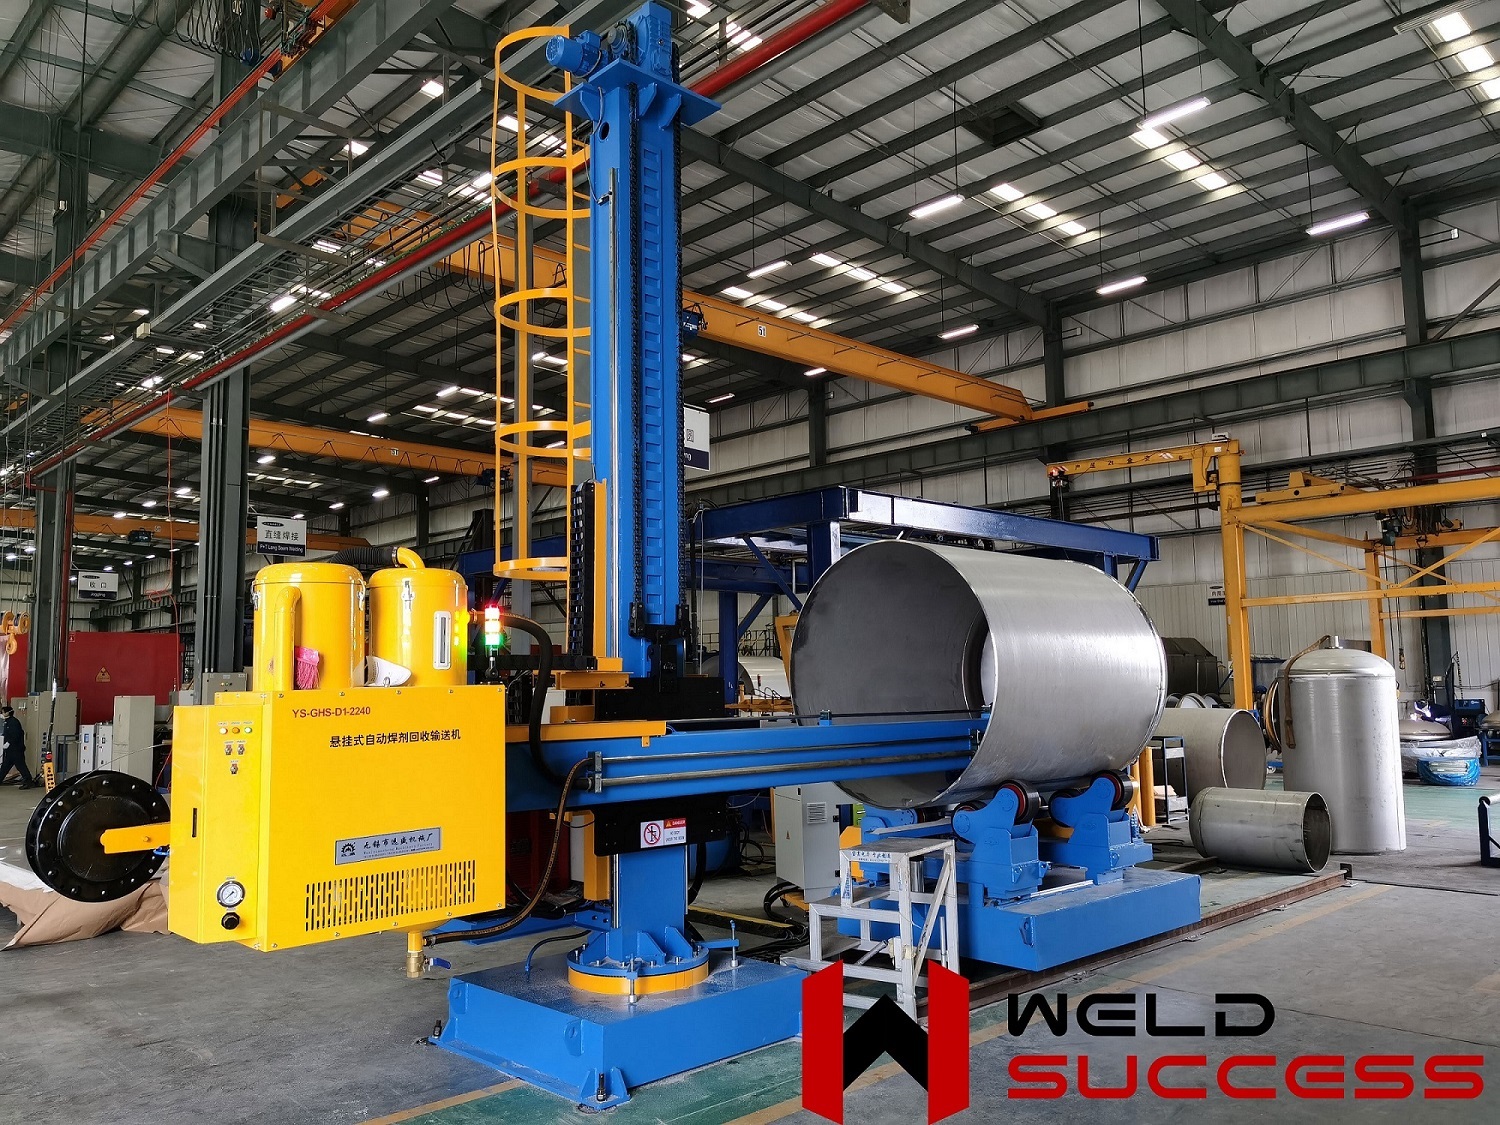 Motorized Rotation Heavy Duty Machines Welding Automatic Manipulators with Welding Rollers